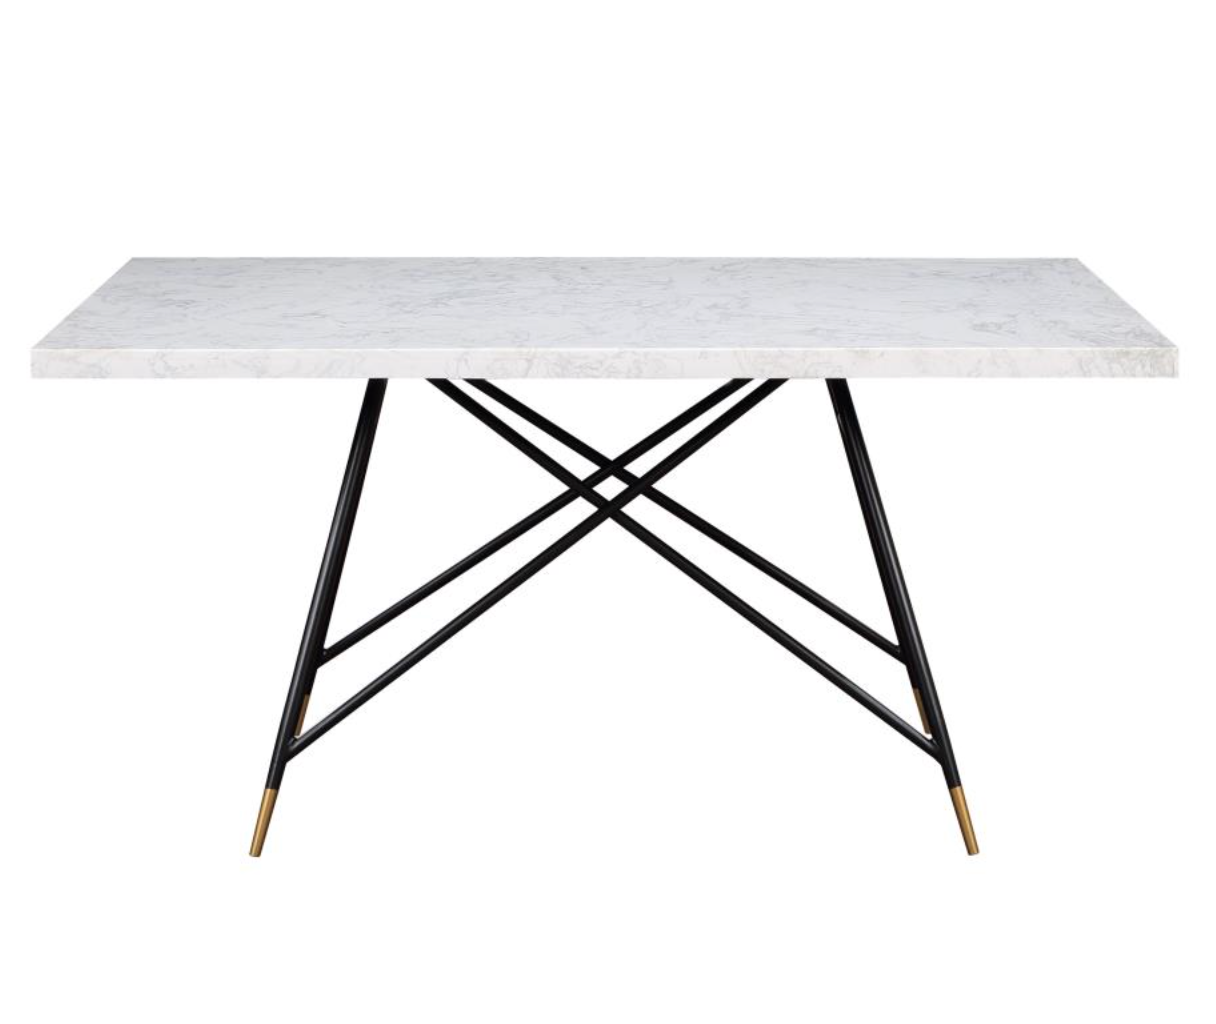 GABRIELLE Rectangular Marble Top Dining Table